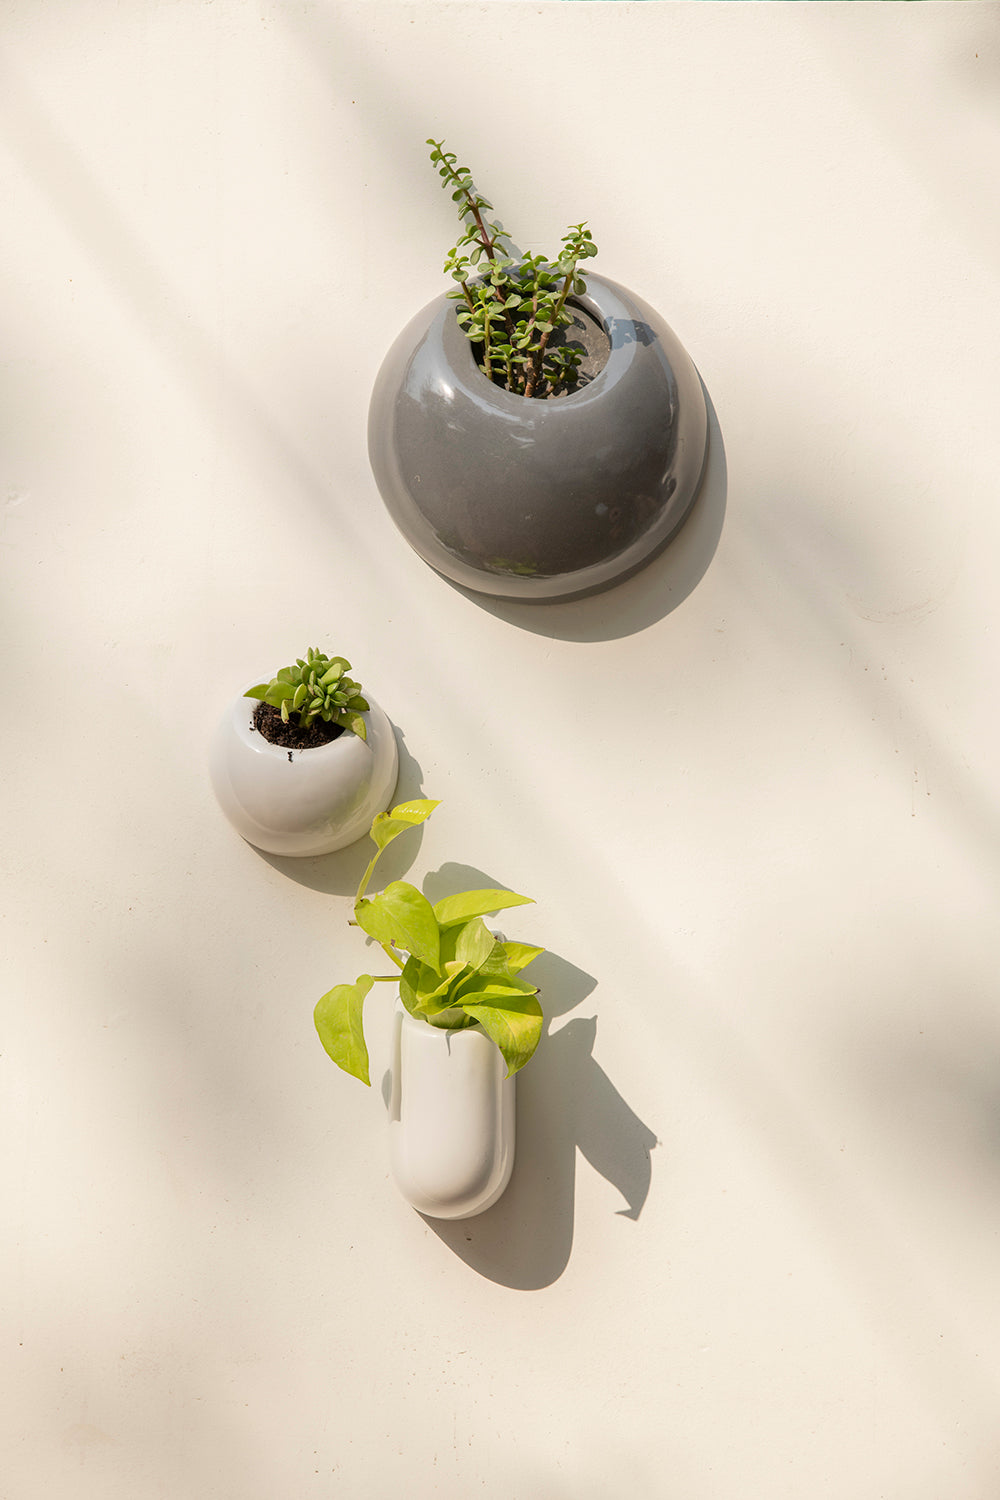 Small size circular Hanging Solitaires in grey color with plant, Extra Small size Circular Hanging Circular Ceramic Wall mount planter in white color with plant and pocket size Hanging Solitaires Ceramic planter with money plant creeper are nailed to the wall.